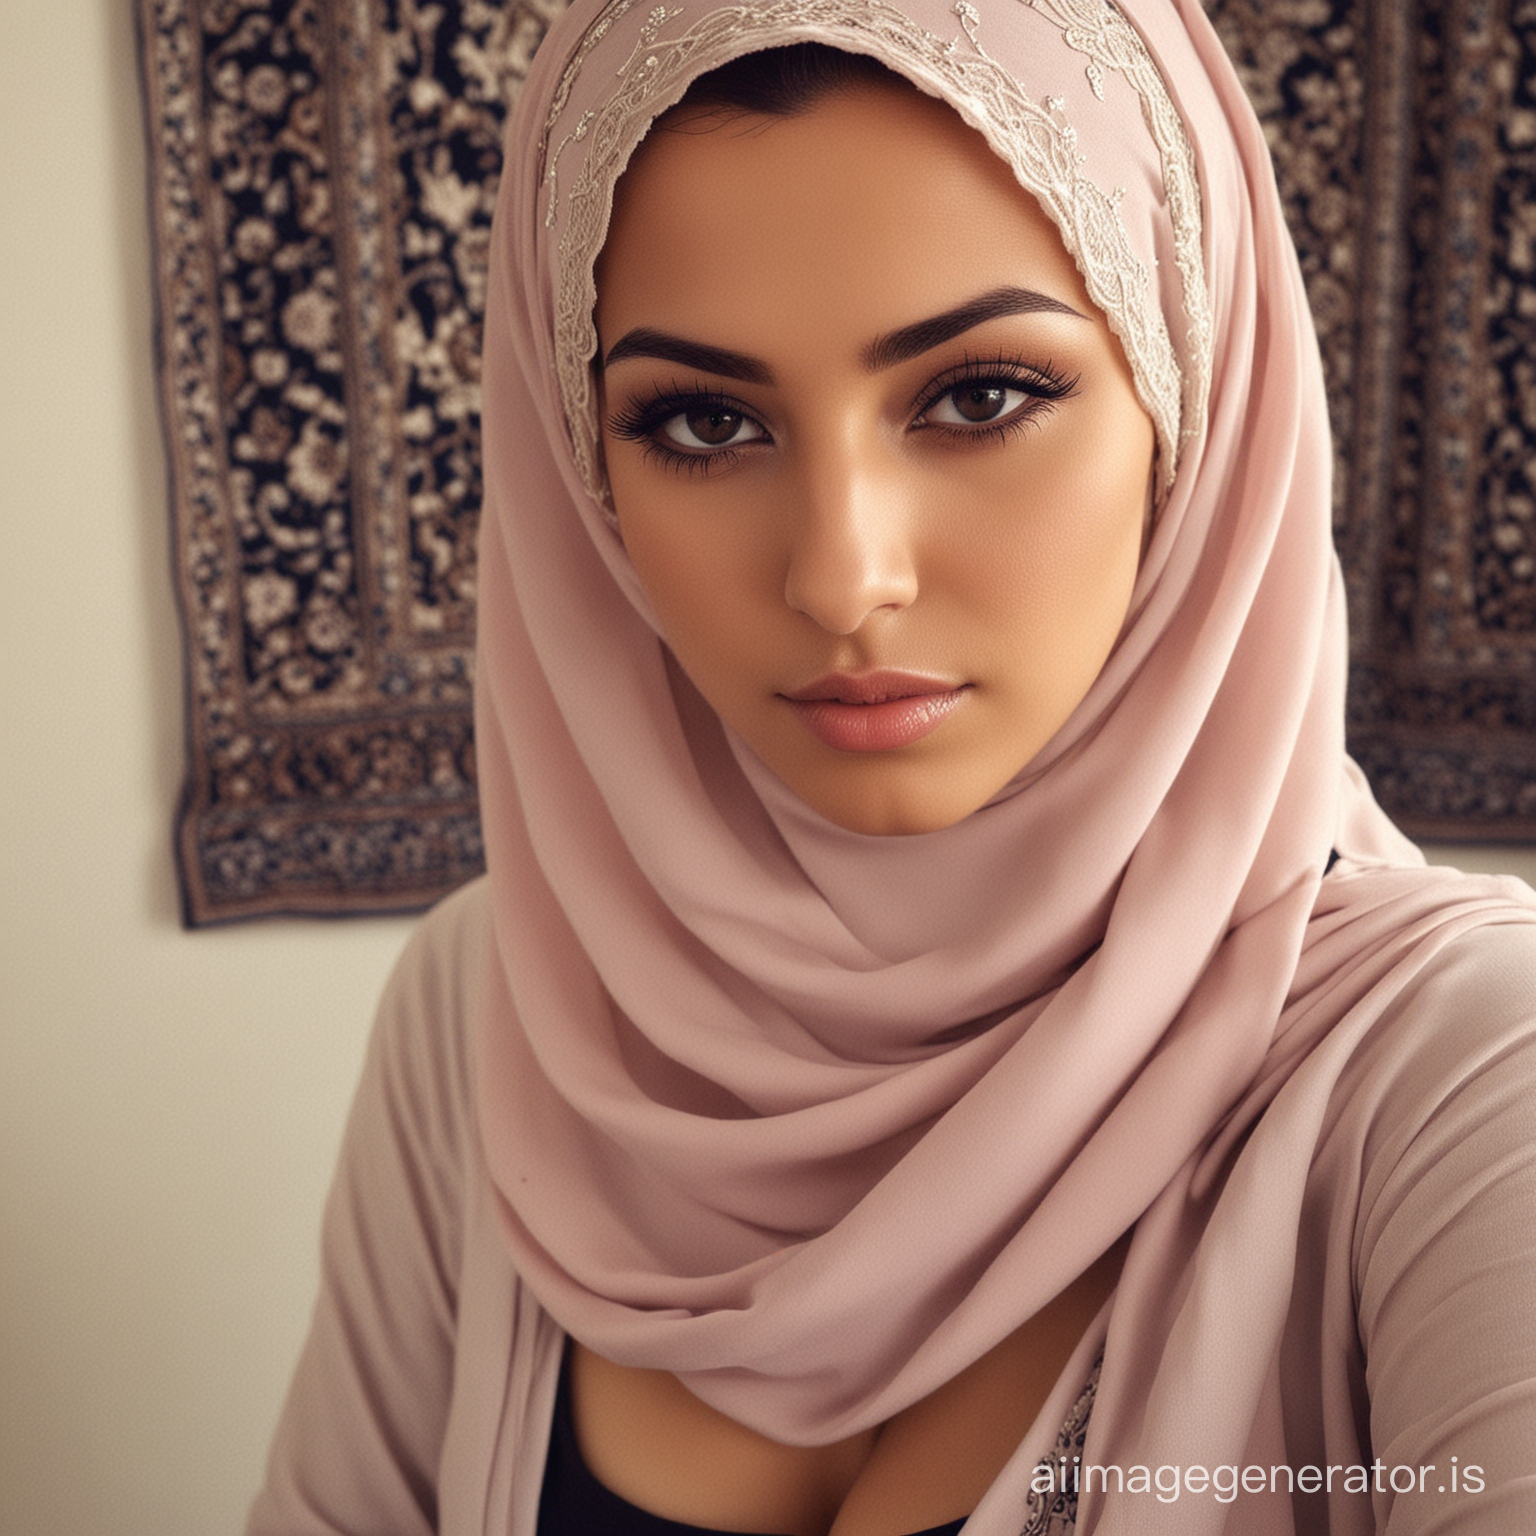  muslims hottest